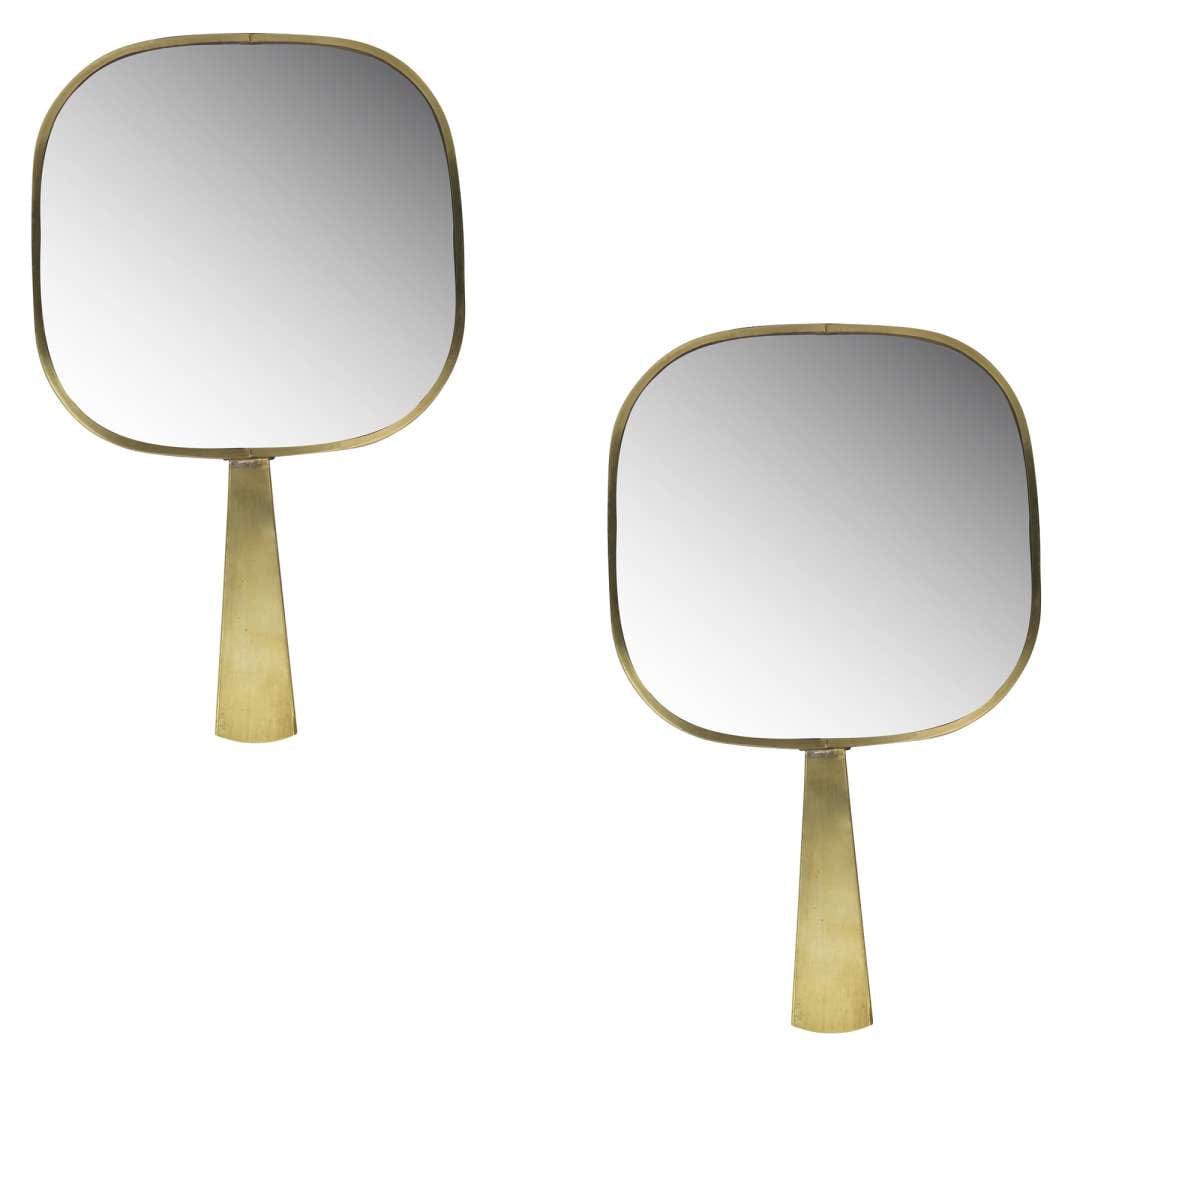 Benzara 7 Inch Hand Mirror With Metal Frame And Handle,Set Of 2,Brass By Benzara Mirrors BM240258